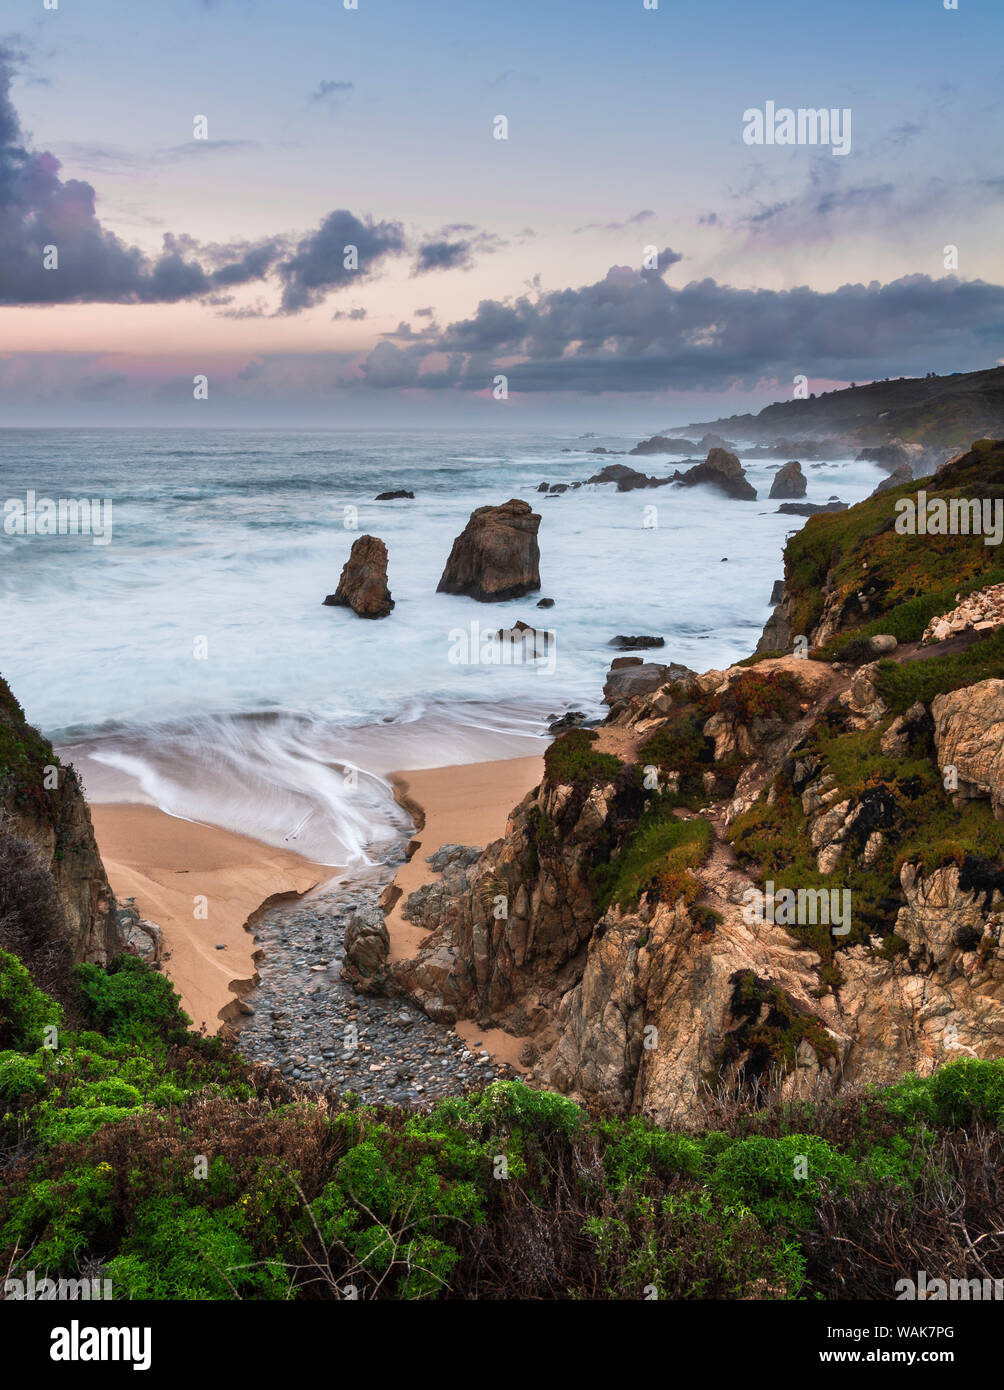 Stream flowing into the Pacific Ocean at Soberanes Point with the coastline in view Stock Photo